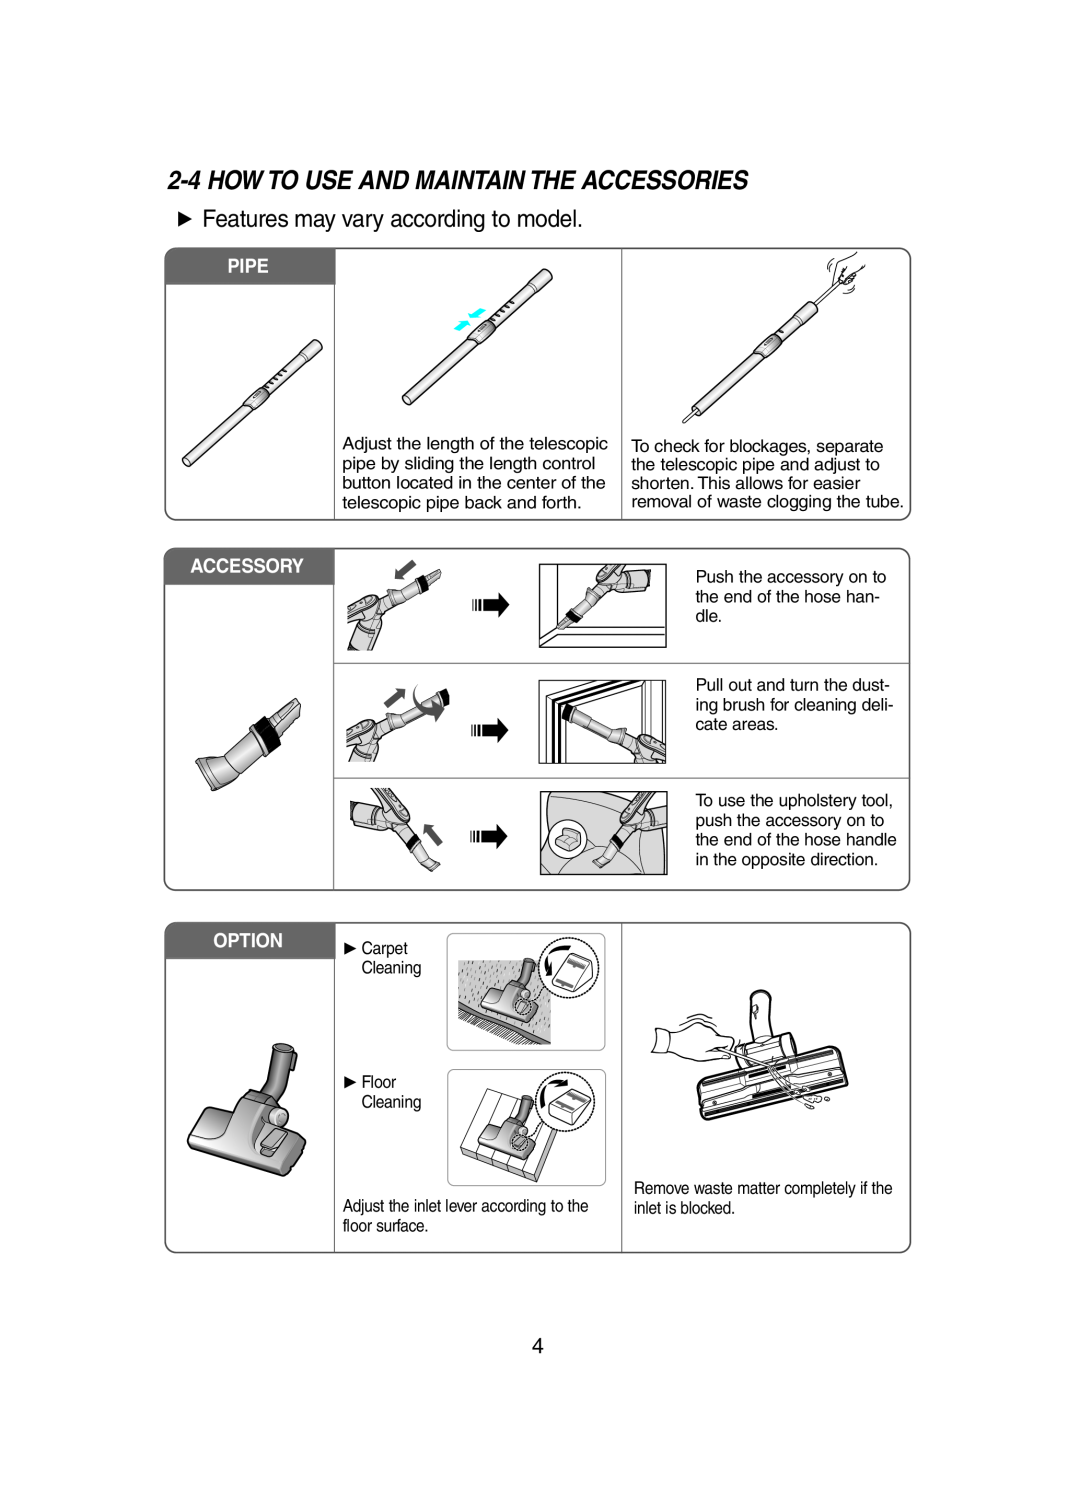 Samsung SC65A1, DJ68-00339U manual 2-4HOW TO USE AND MAINTAIN THE ACCESSORIES, Pipe, Accessory, OPTION Carpet 